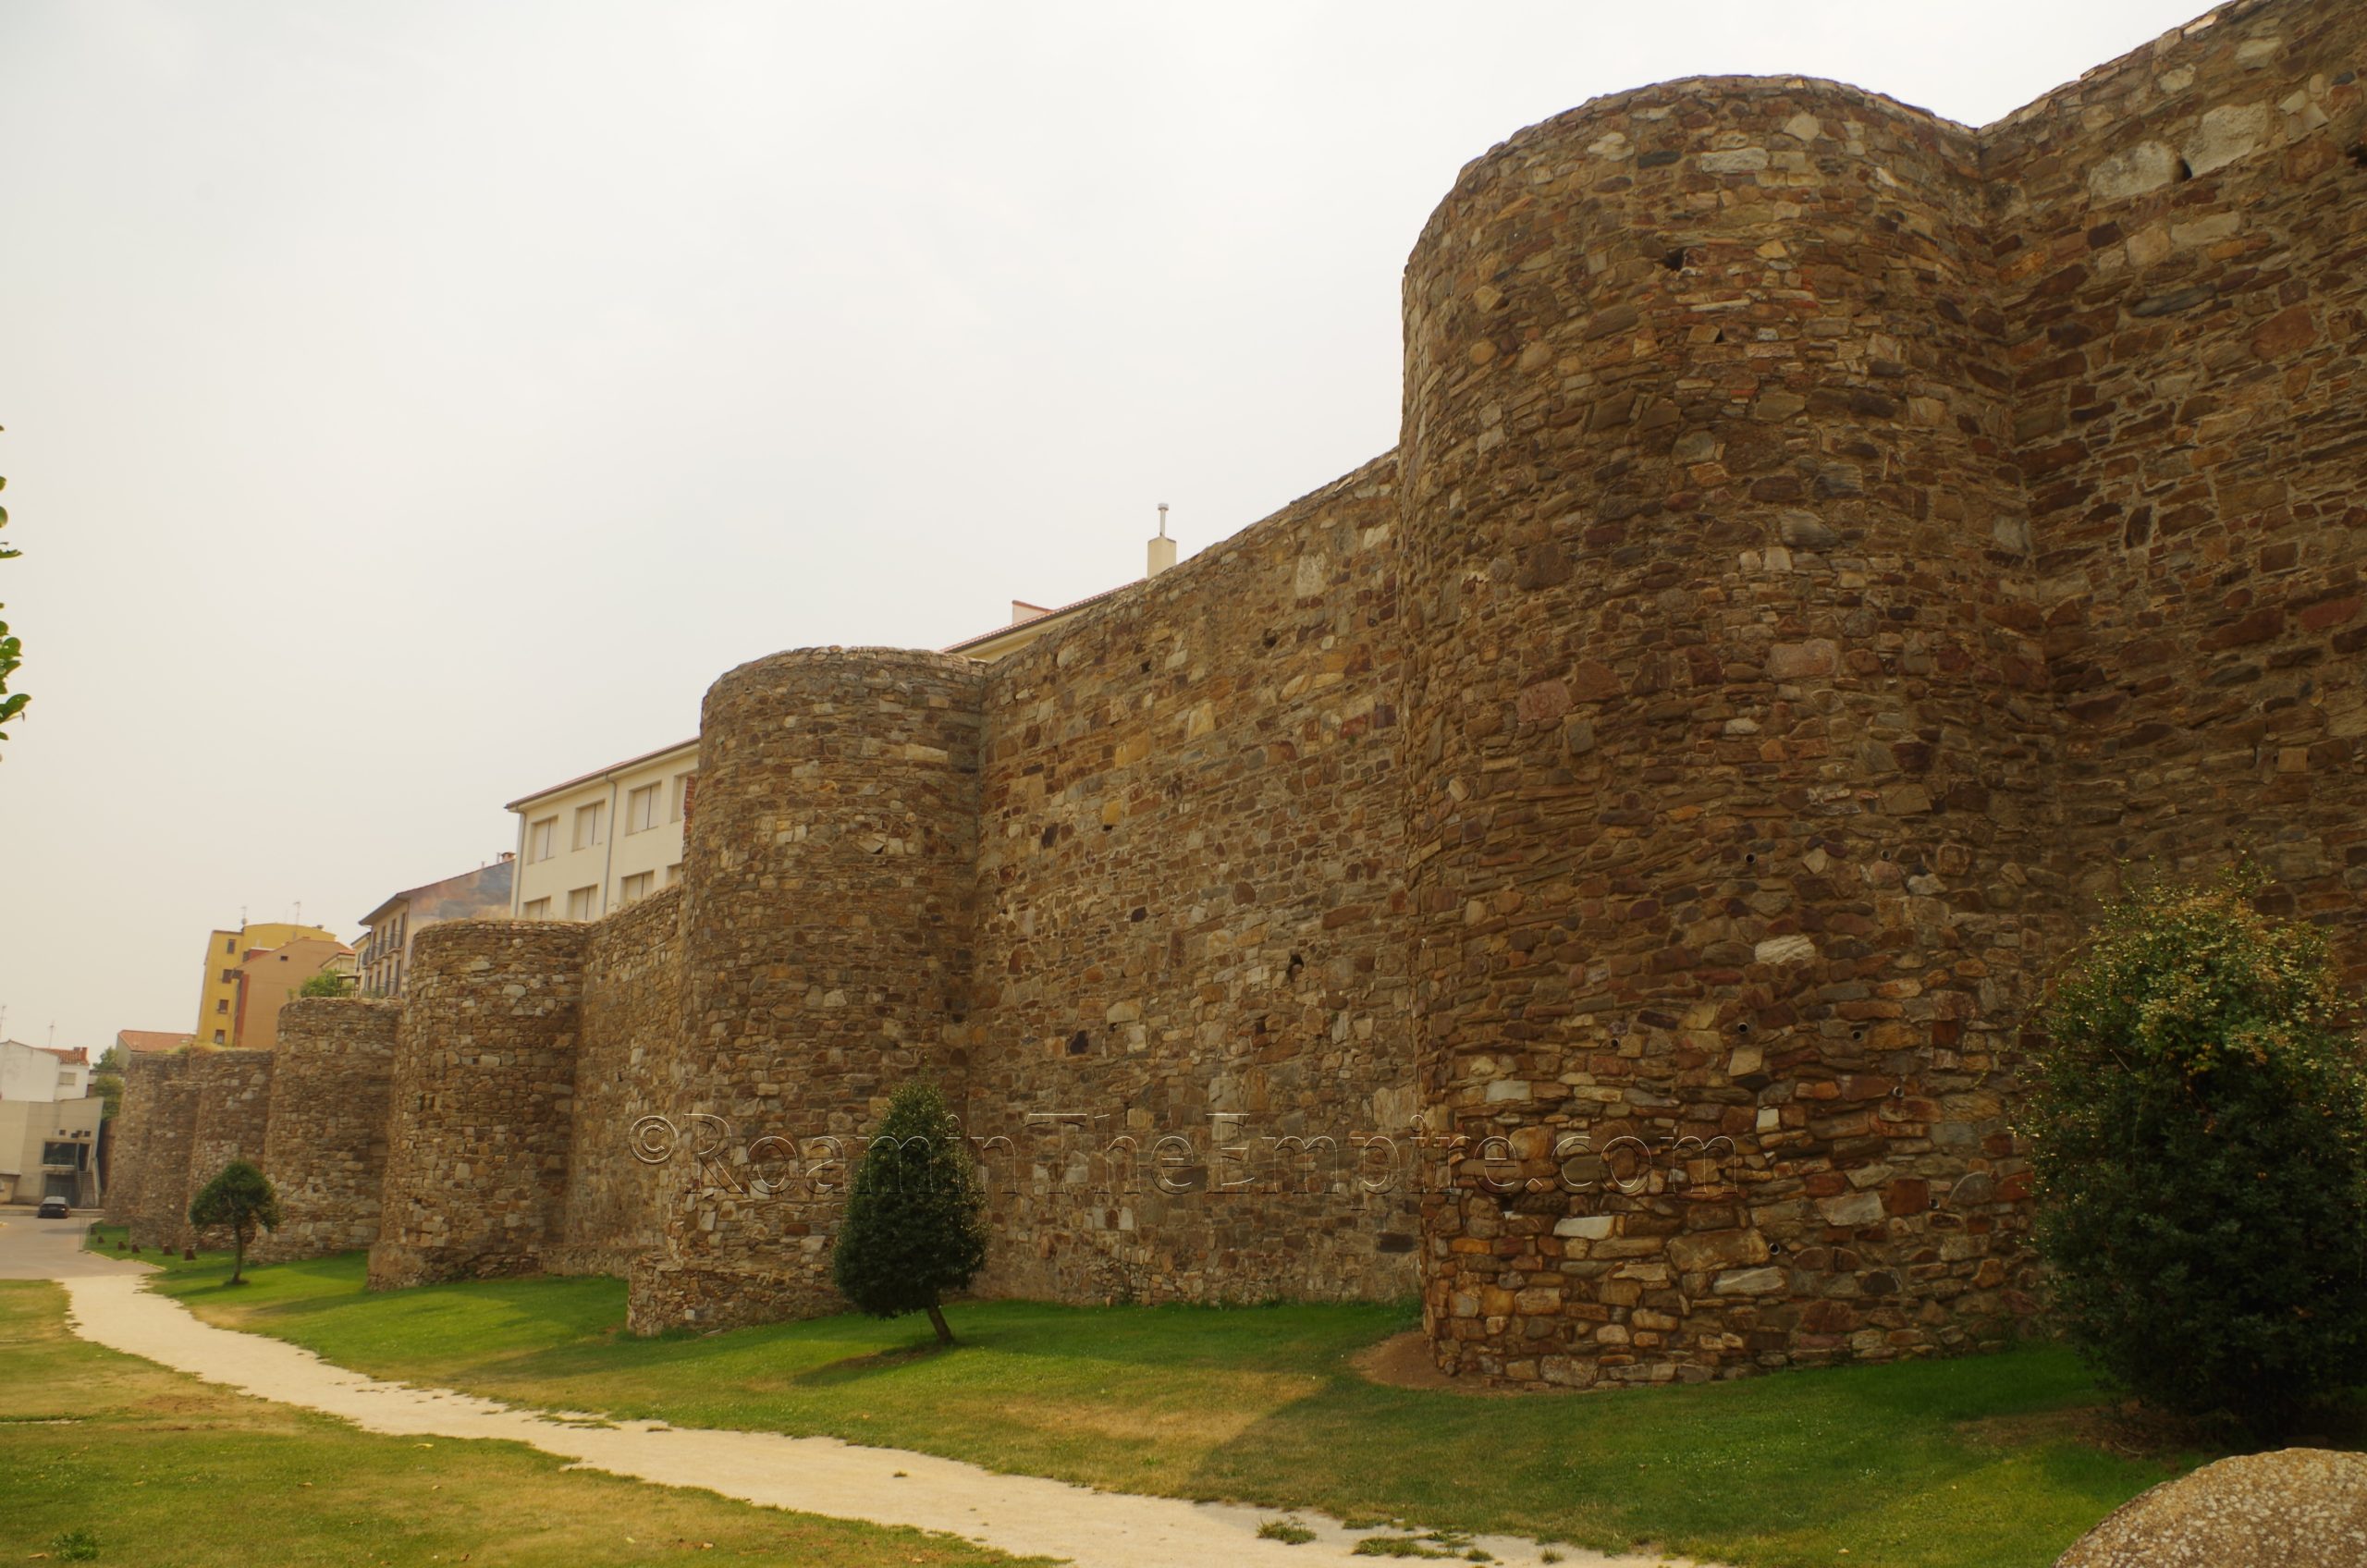 Medieval walls of Astorga, constructed on the 3rd-4th century Roman circuit of walls.